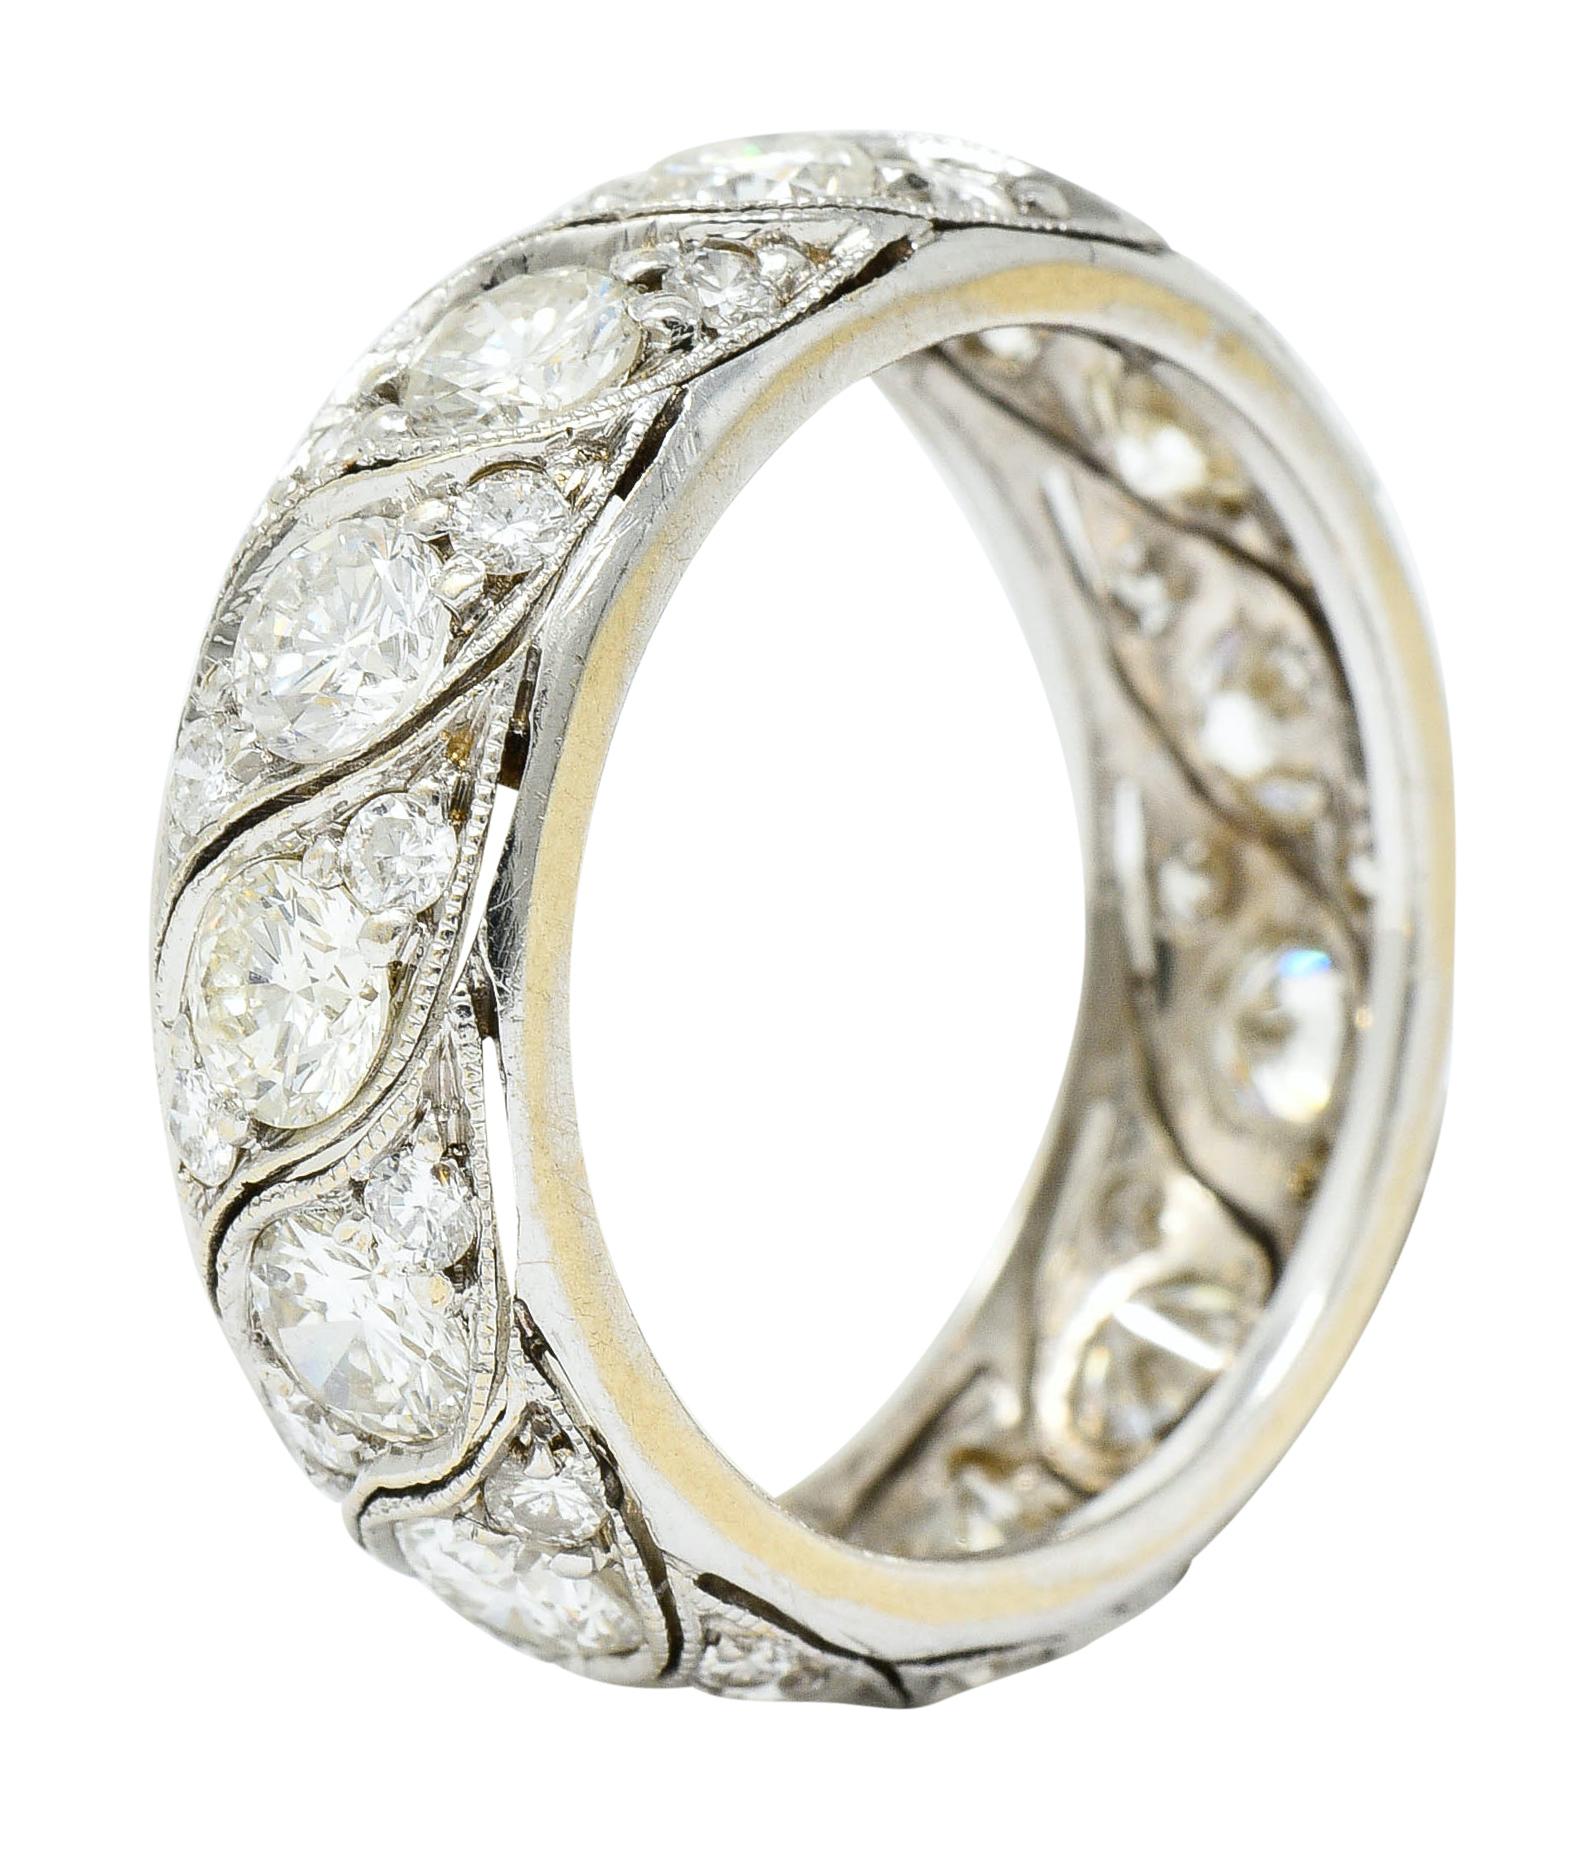 Eternity style band with a swiveled eyelet motif throughout, accented by milgrain

Featuring sets of three round brilliant cut diamonds, fully around

Weighing in total approximately 3.78 carats with H to J color and VS to SI clarity

Tested as 14